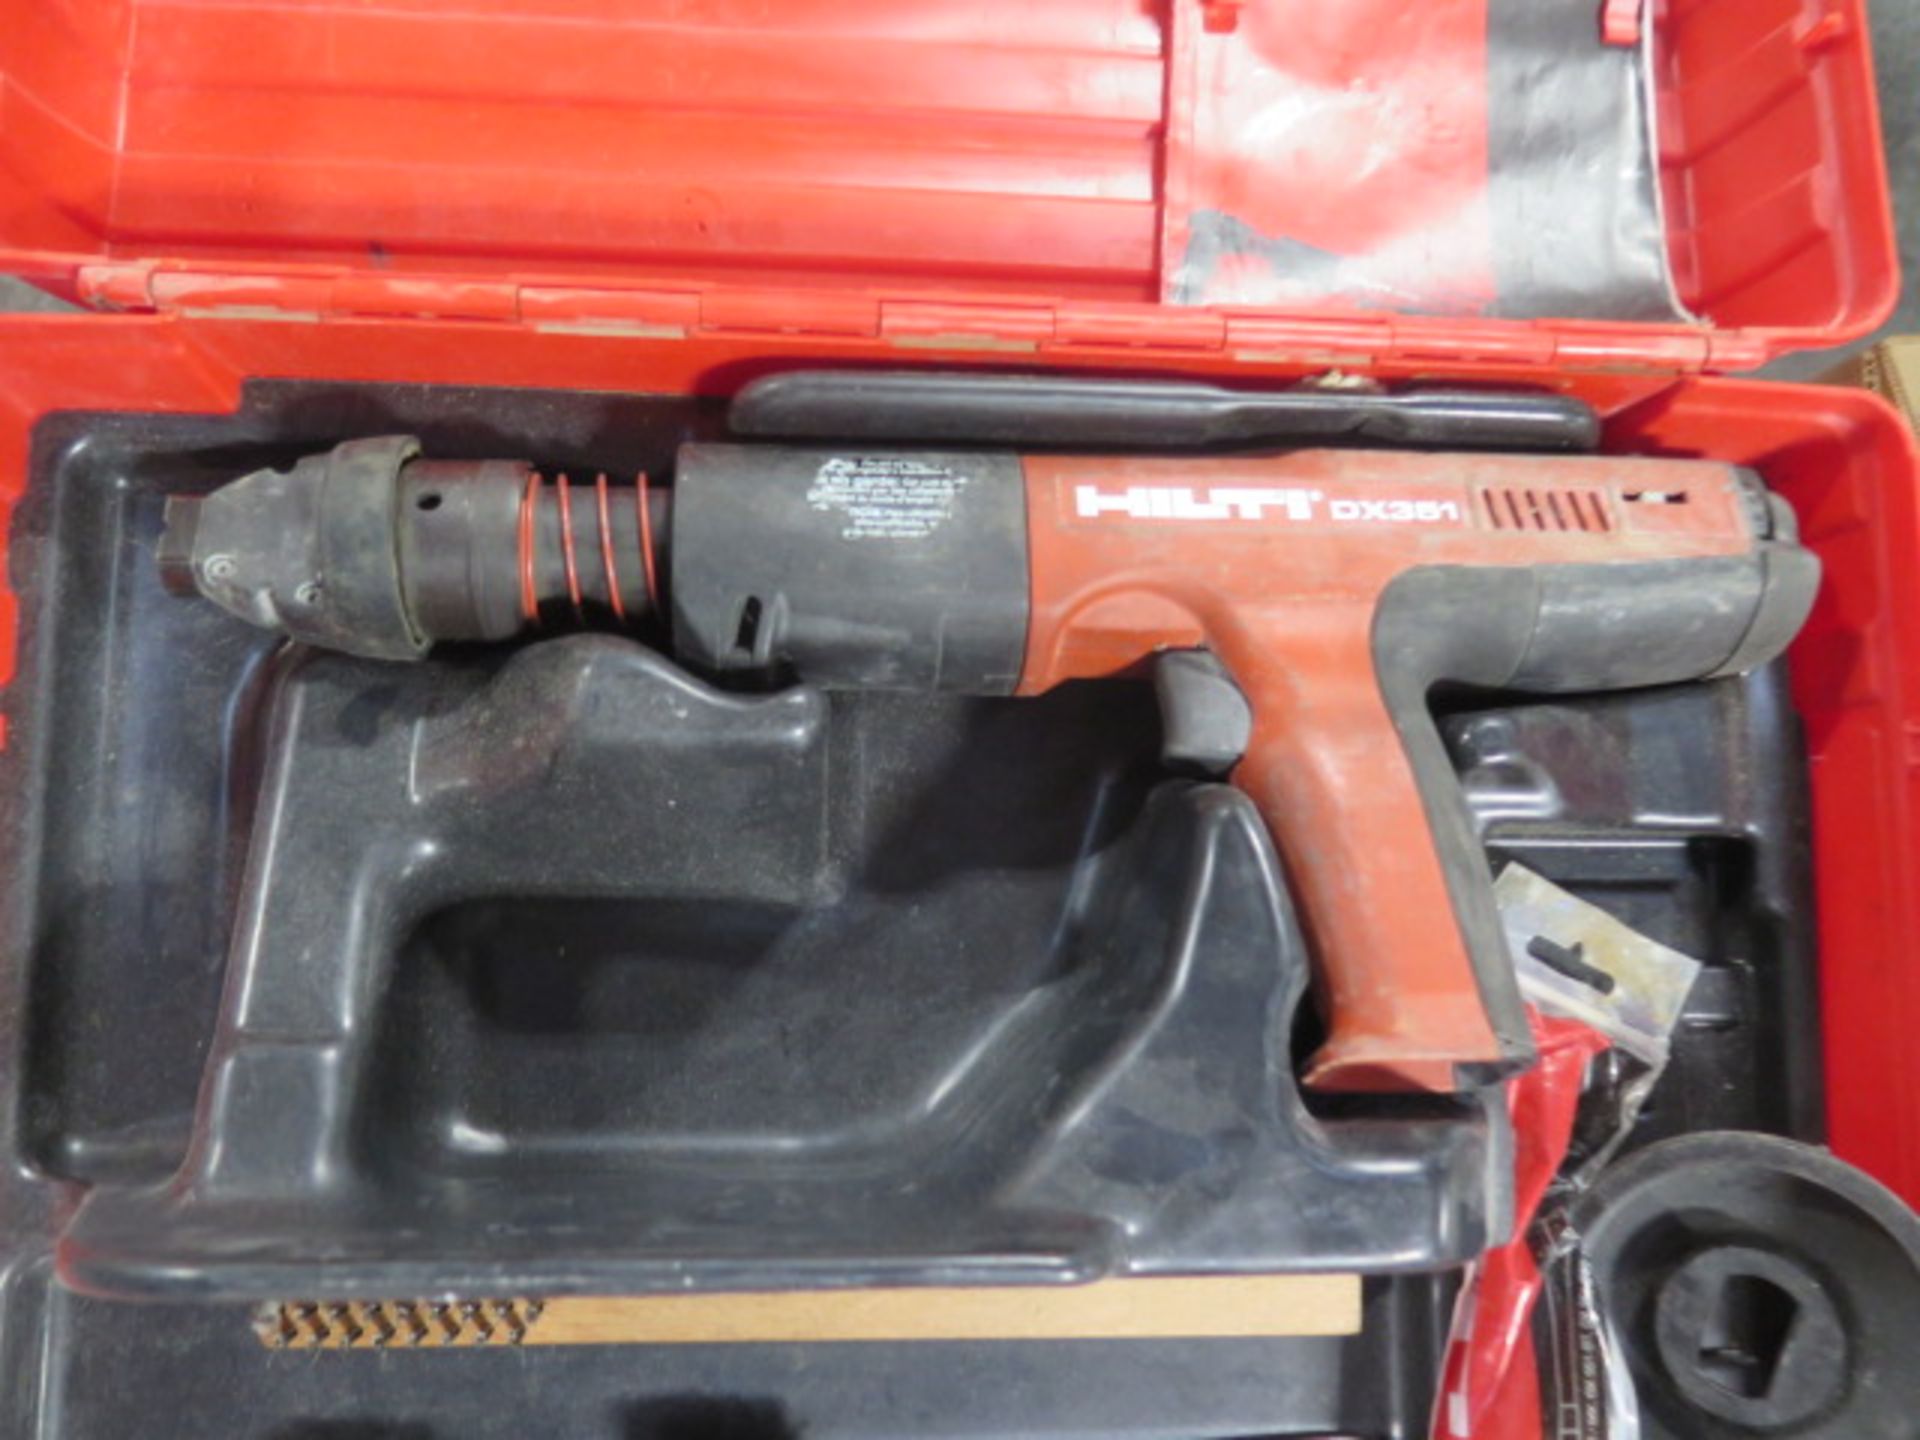 Hilti DX351BT Powder Actuated Guns (4) (SOLD AS-IS - NO WARRANTY) - Image 7 of 12